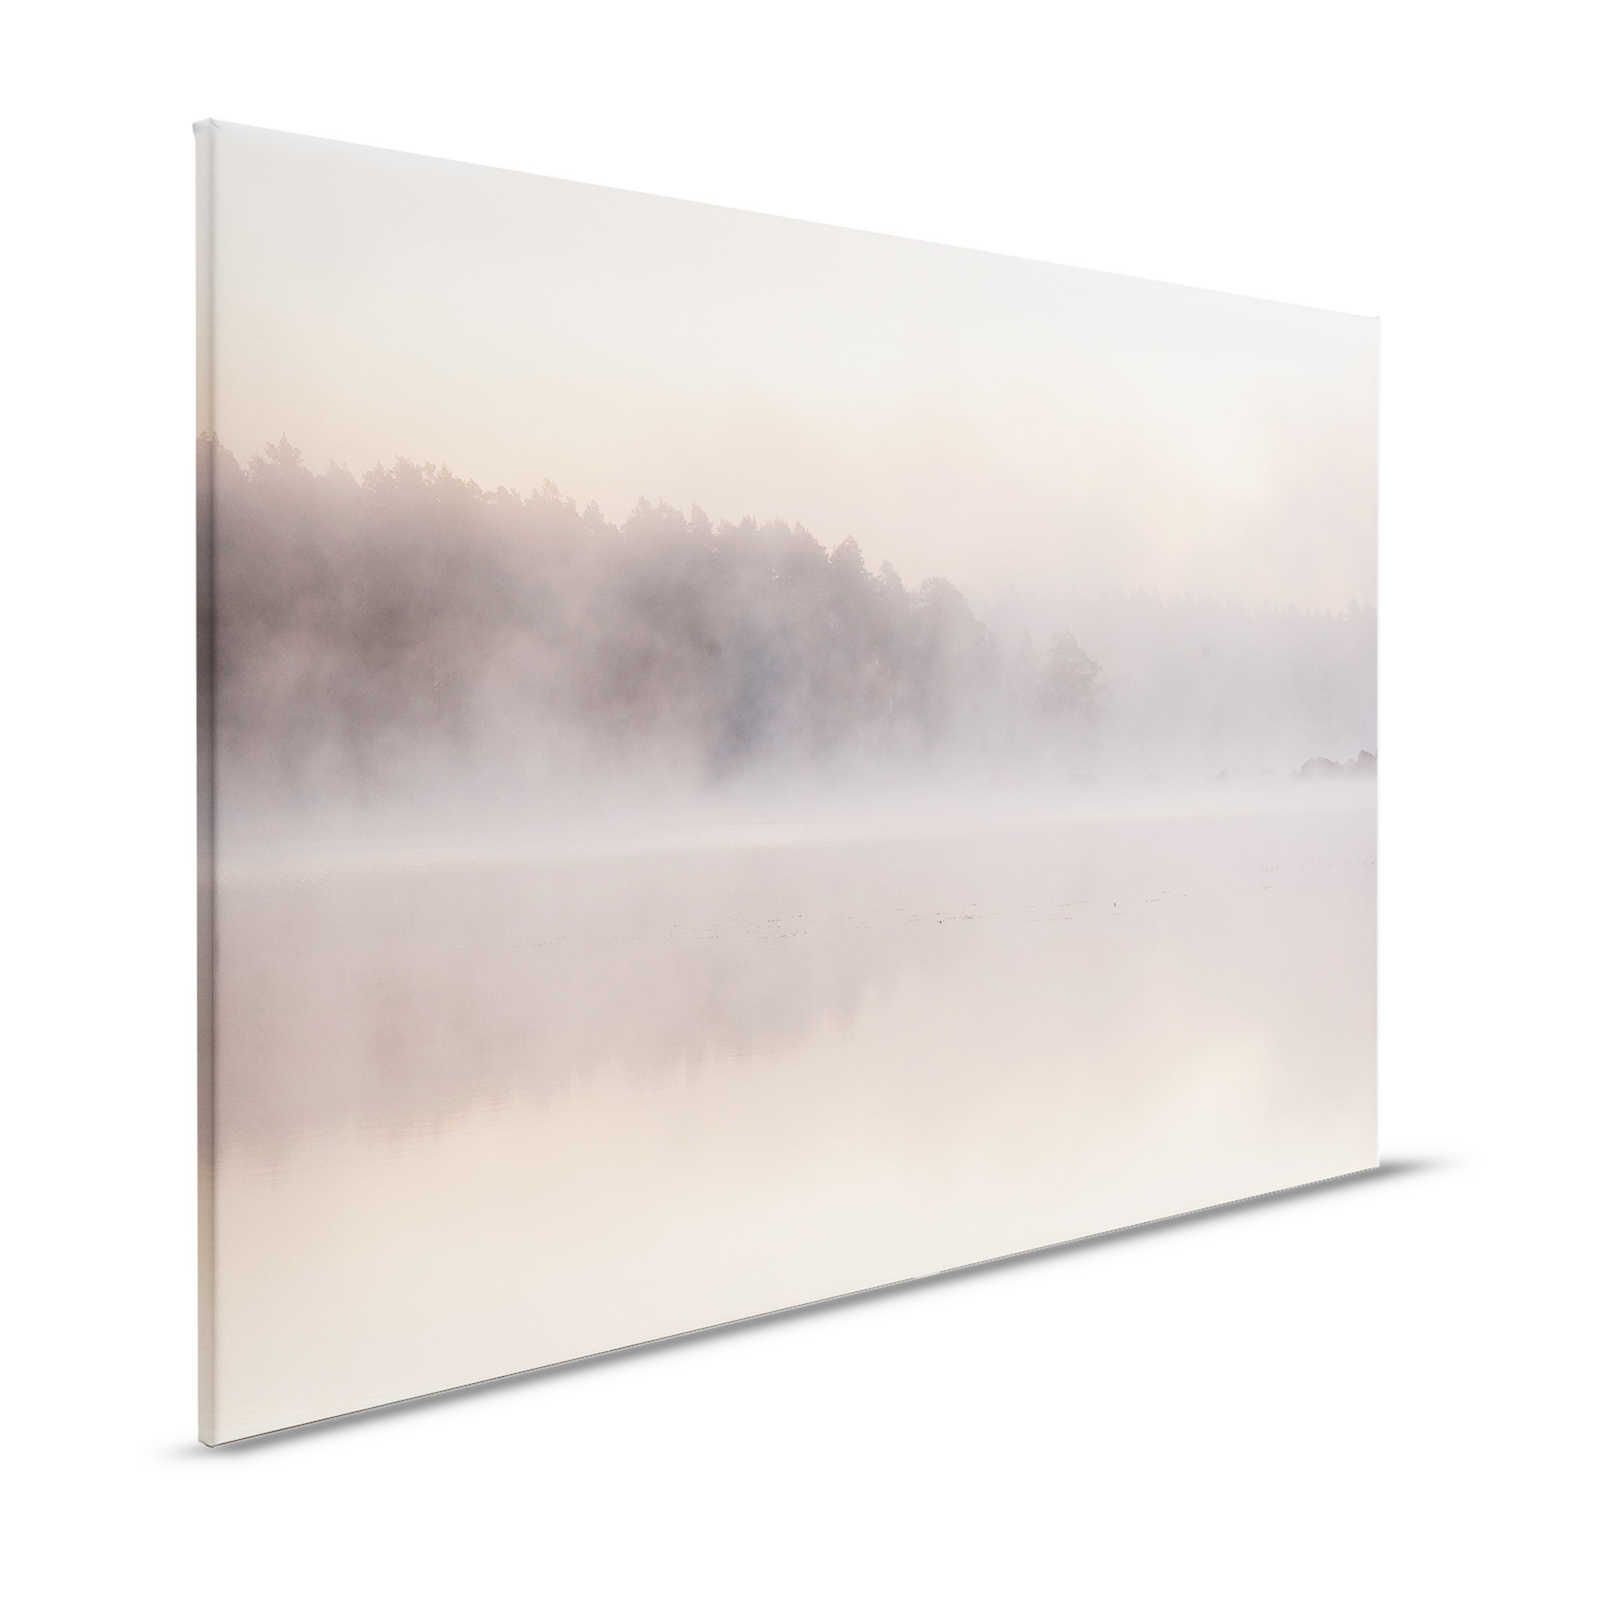 Avalon 2 - Canvas painting Lake in the morning with early morning mist - 1,20 m x 0,80 m
